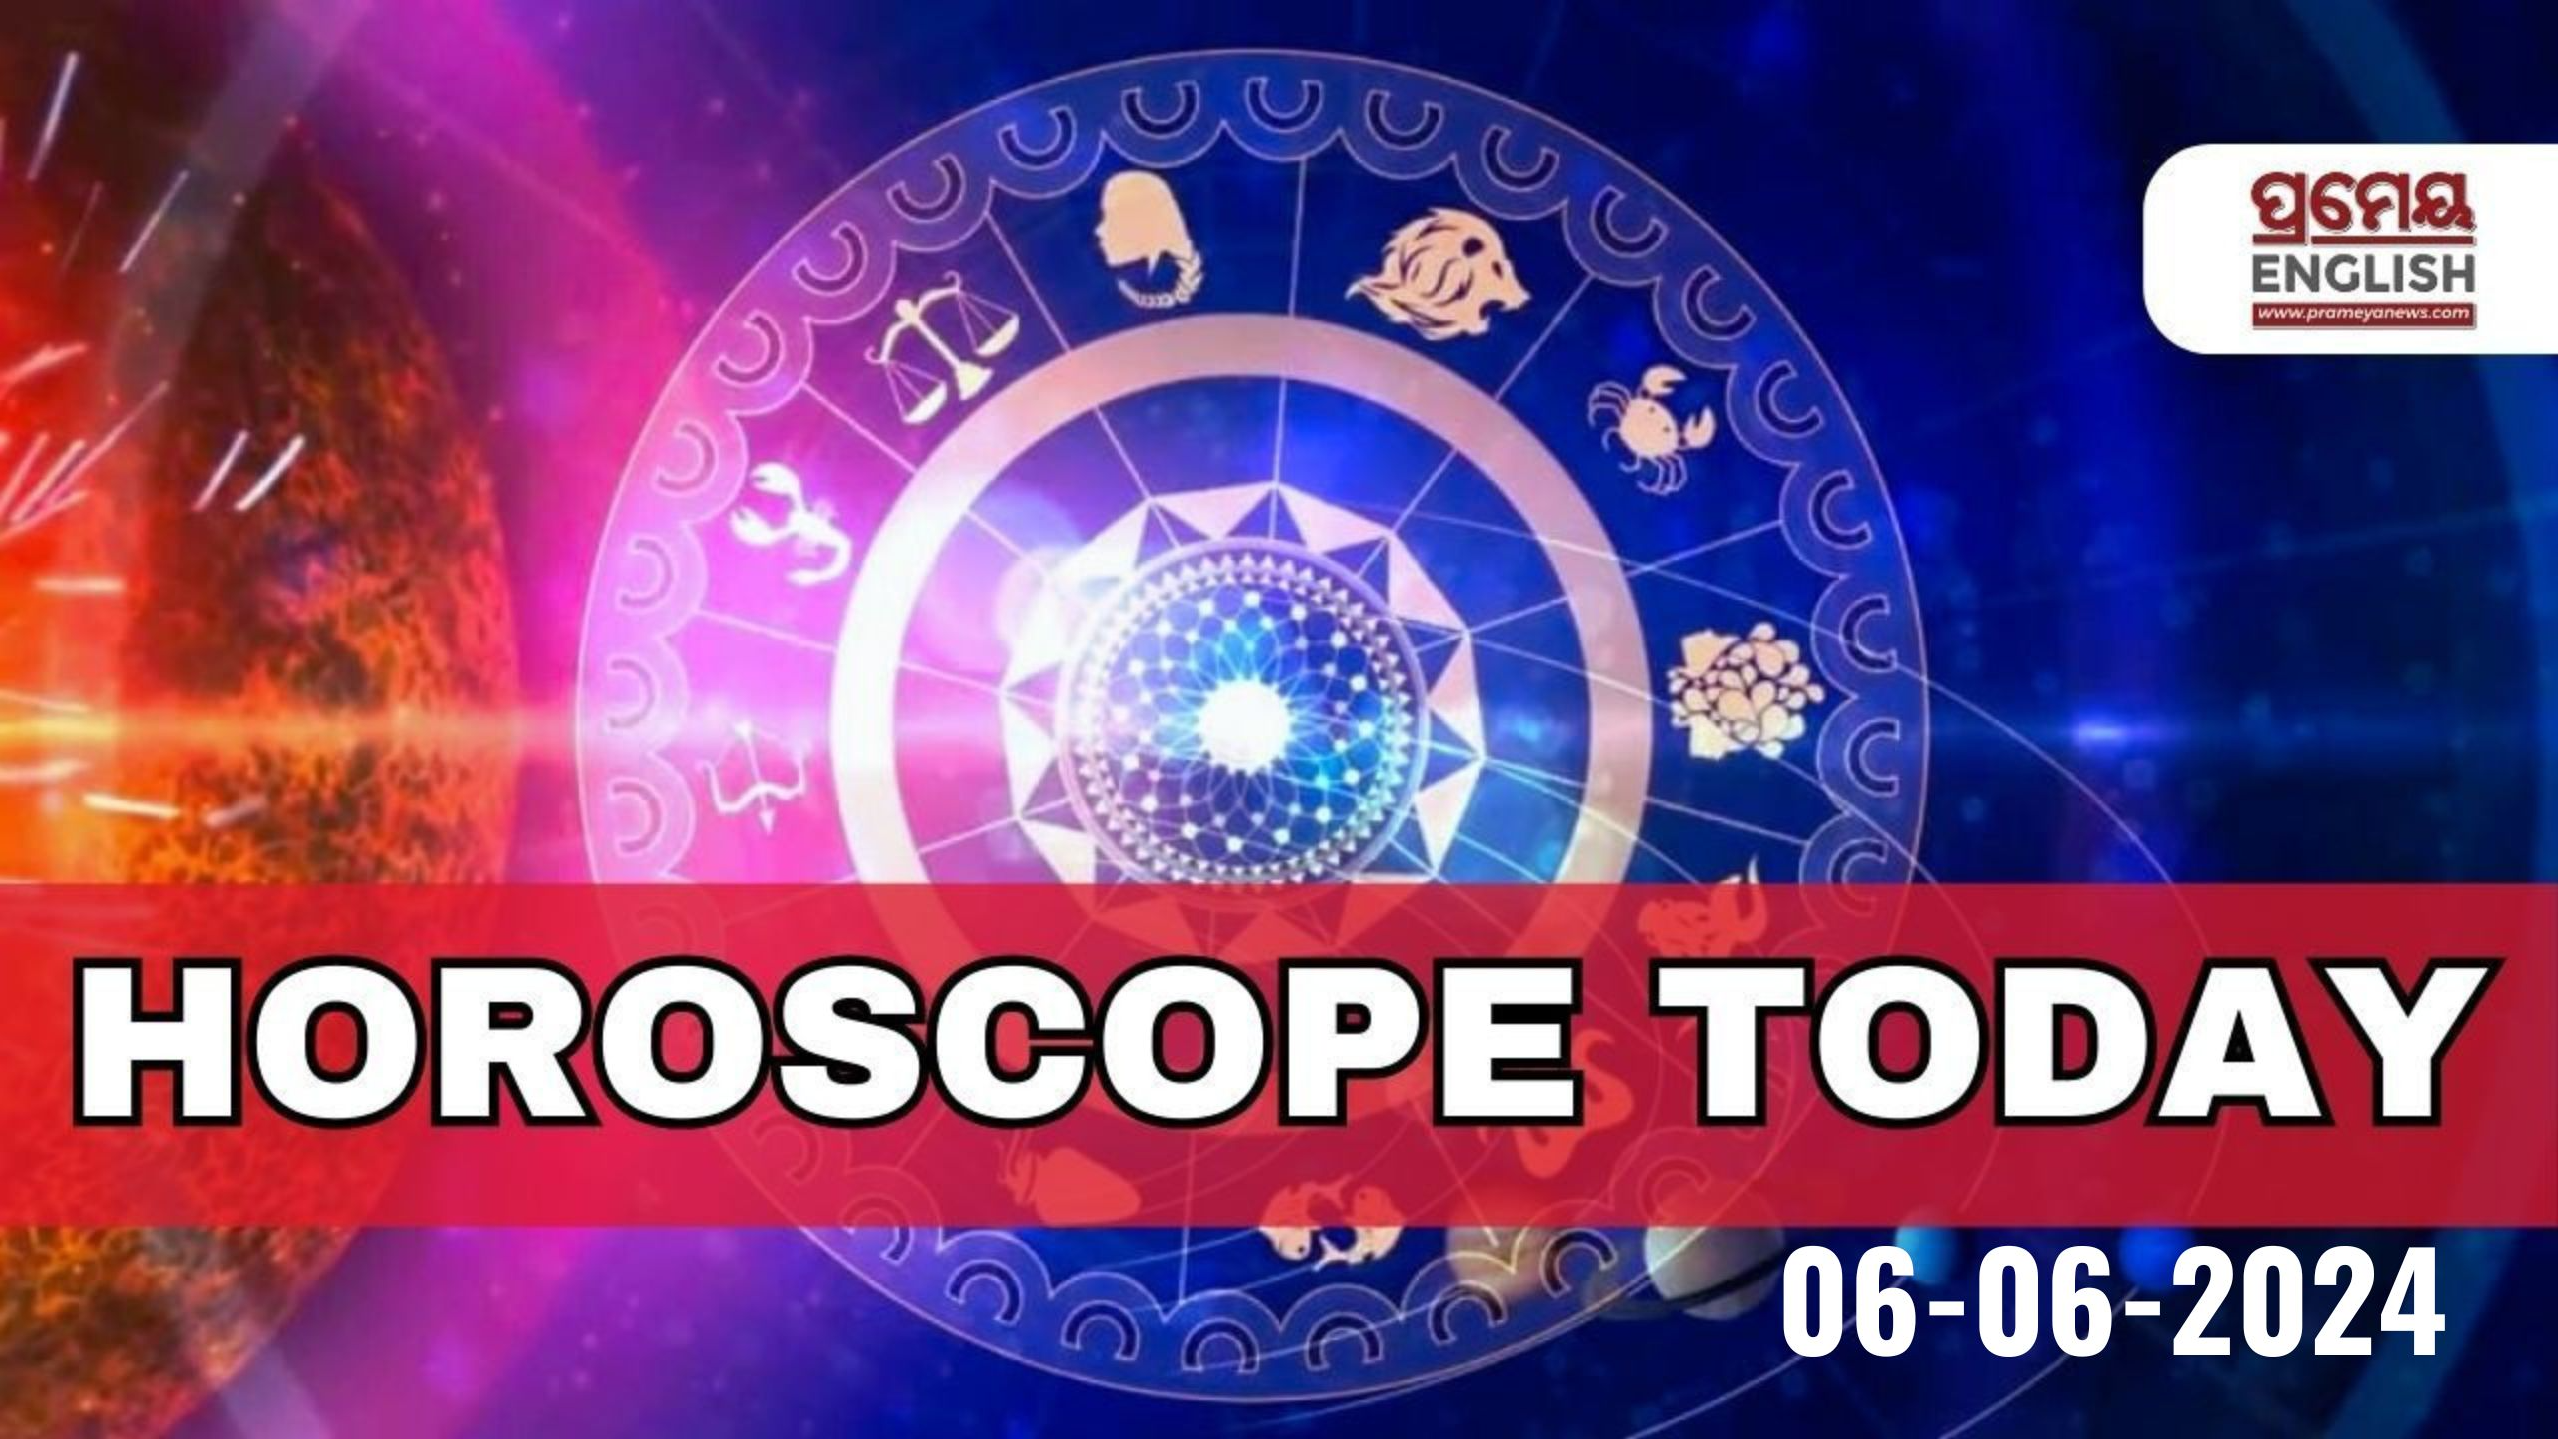 Horoscope Today: Astrological prediction for June 6, 2024